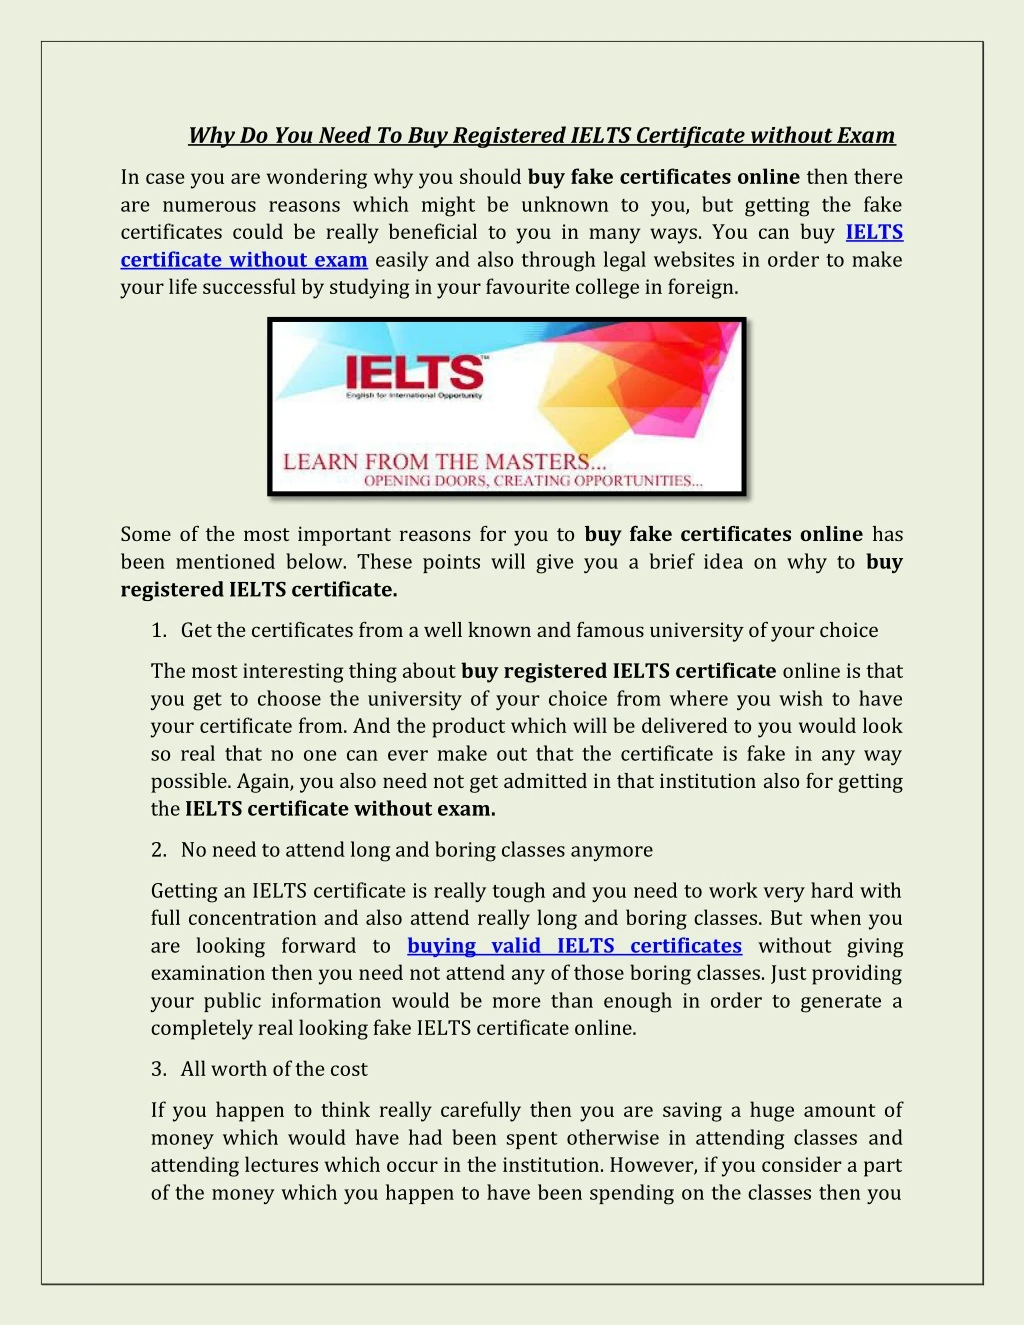 why do you need to buy registered ielts